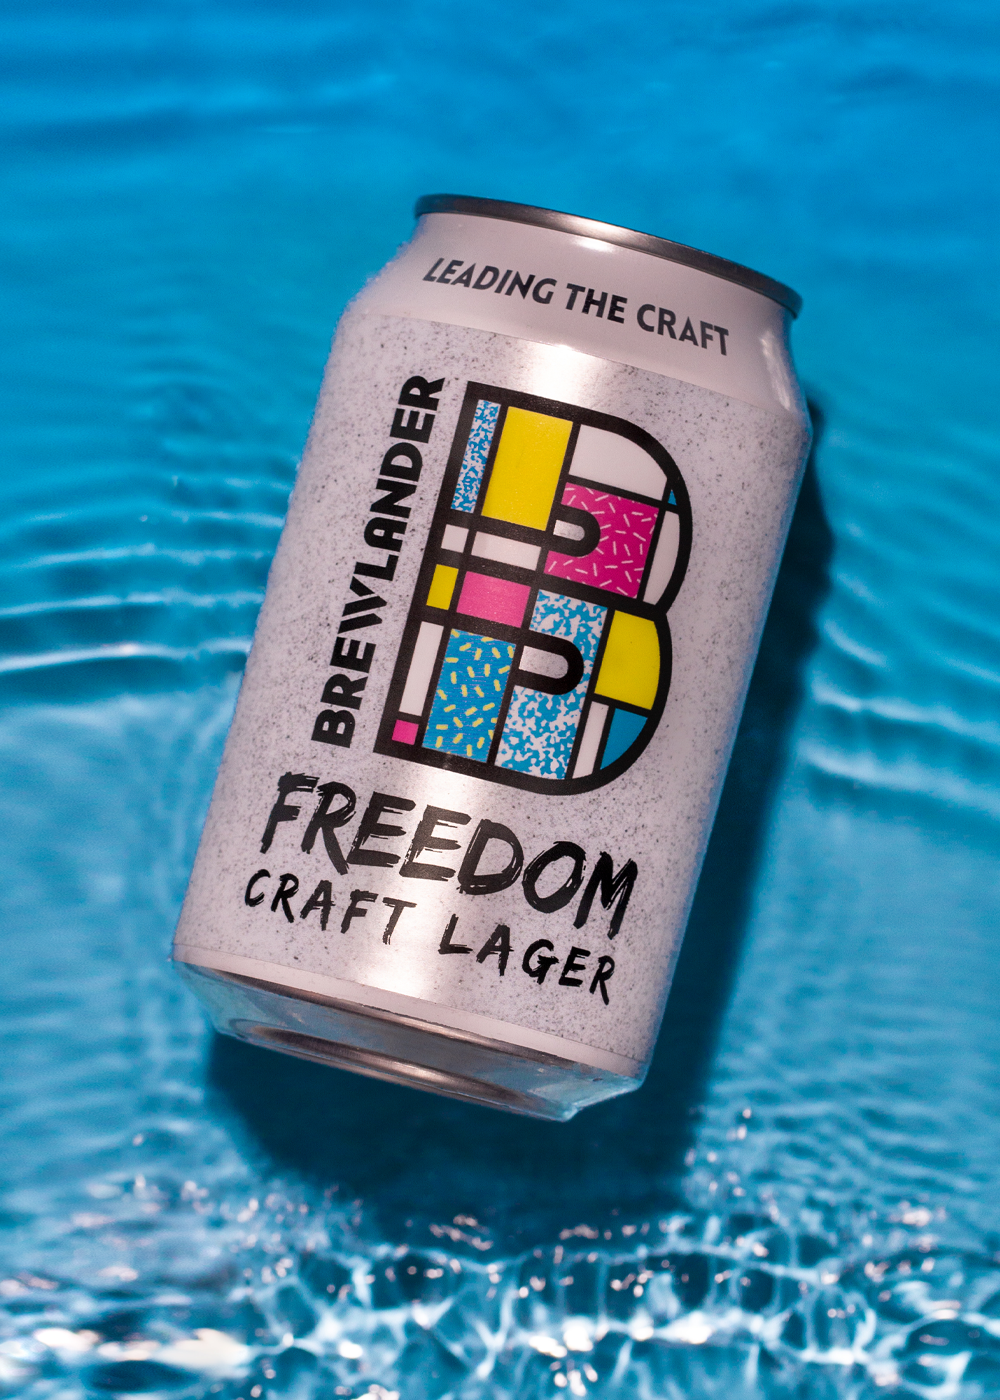 Freedom Lager Craft beer local brewery